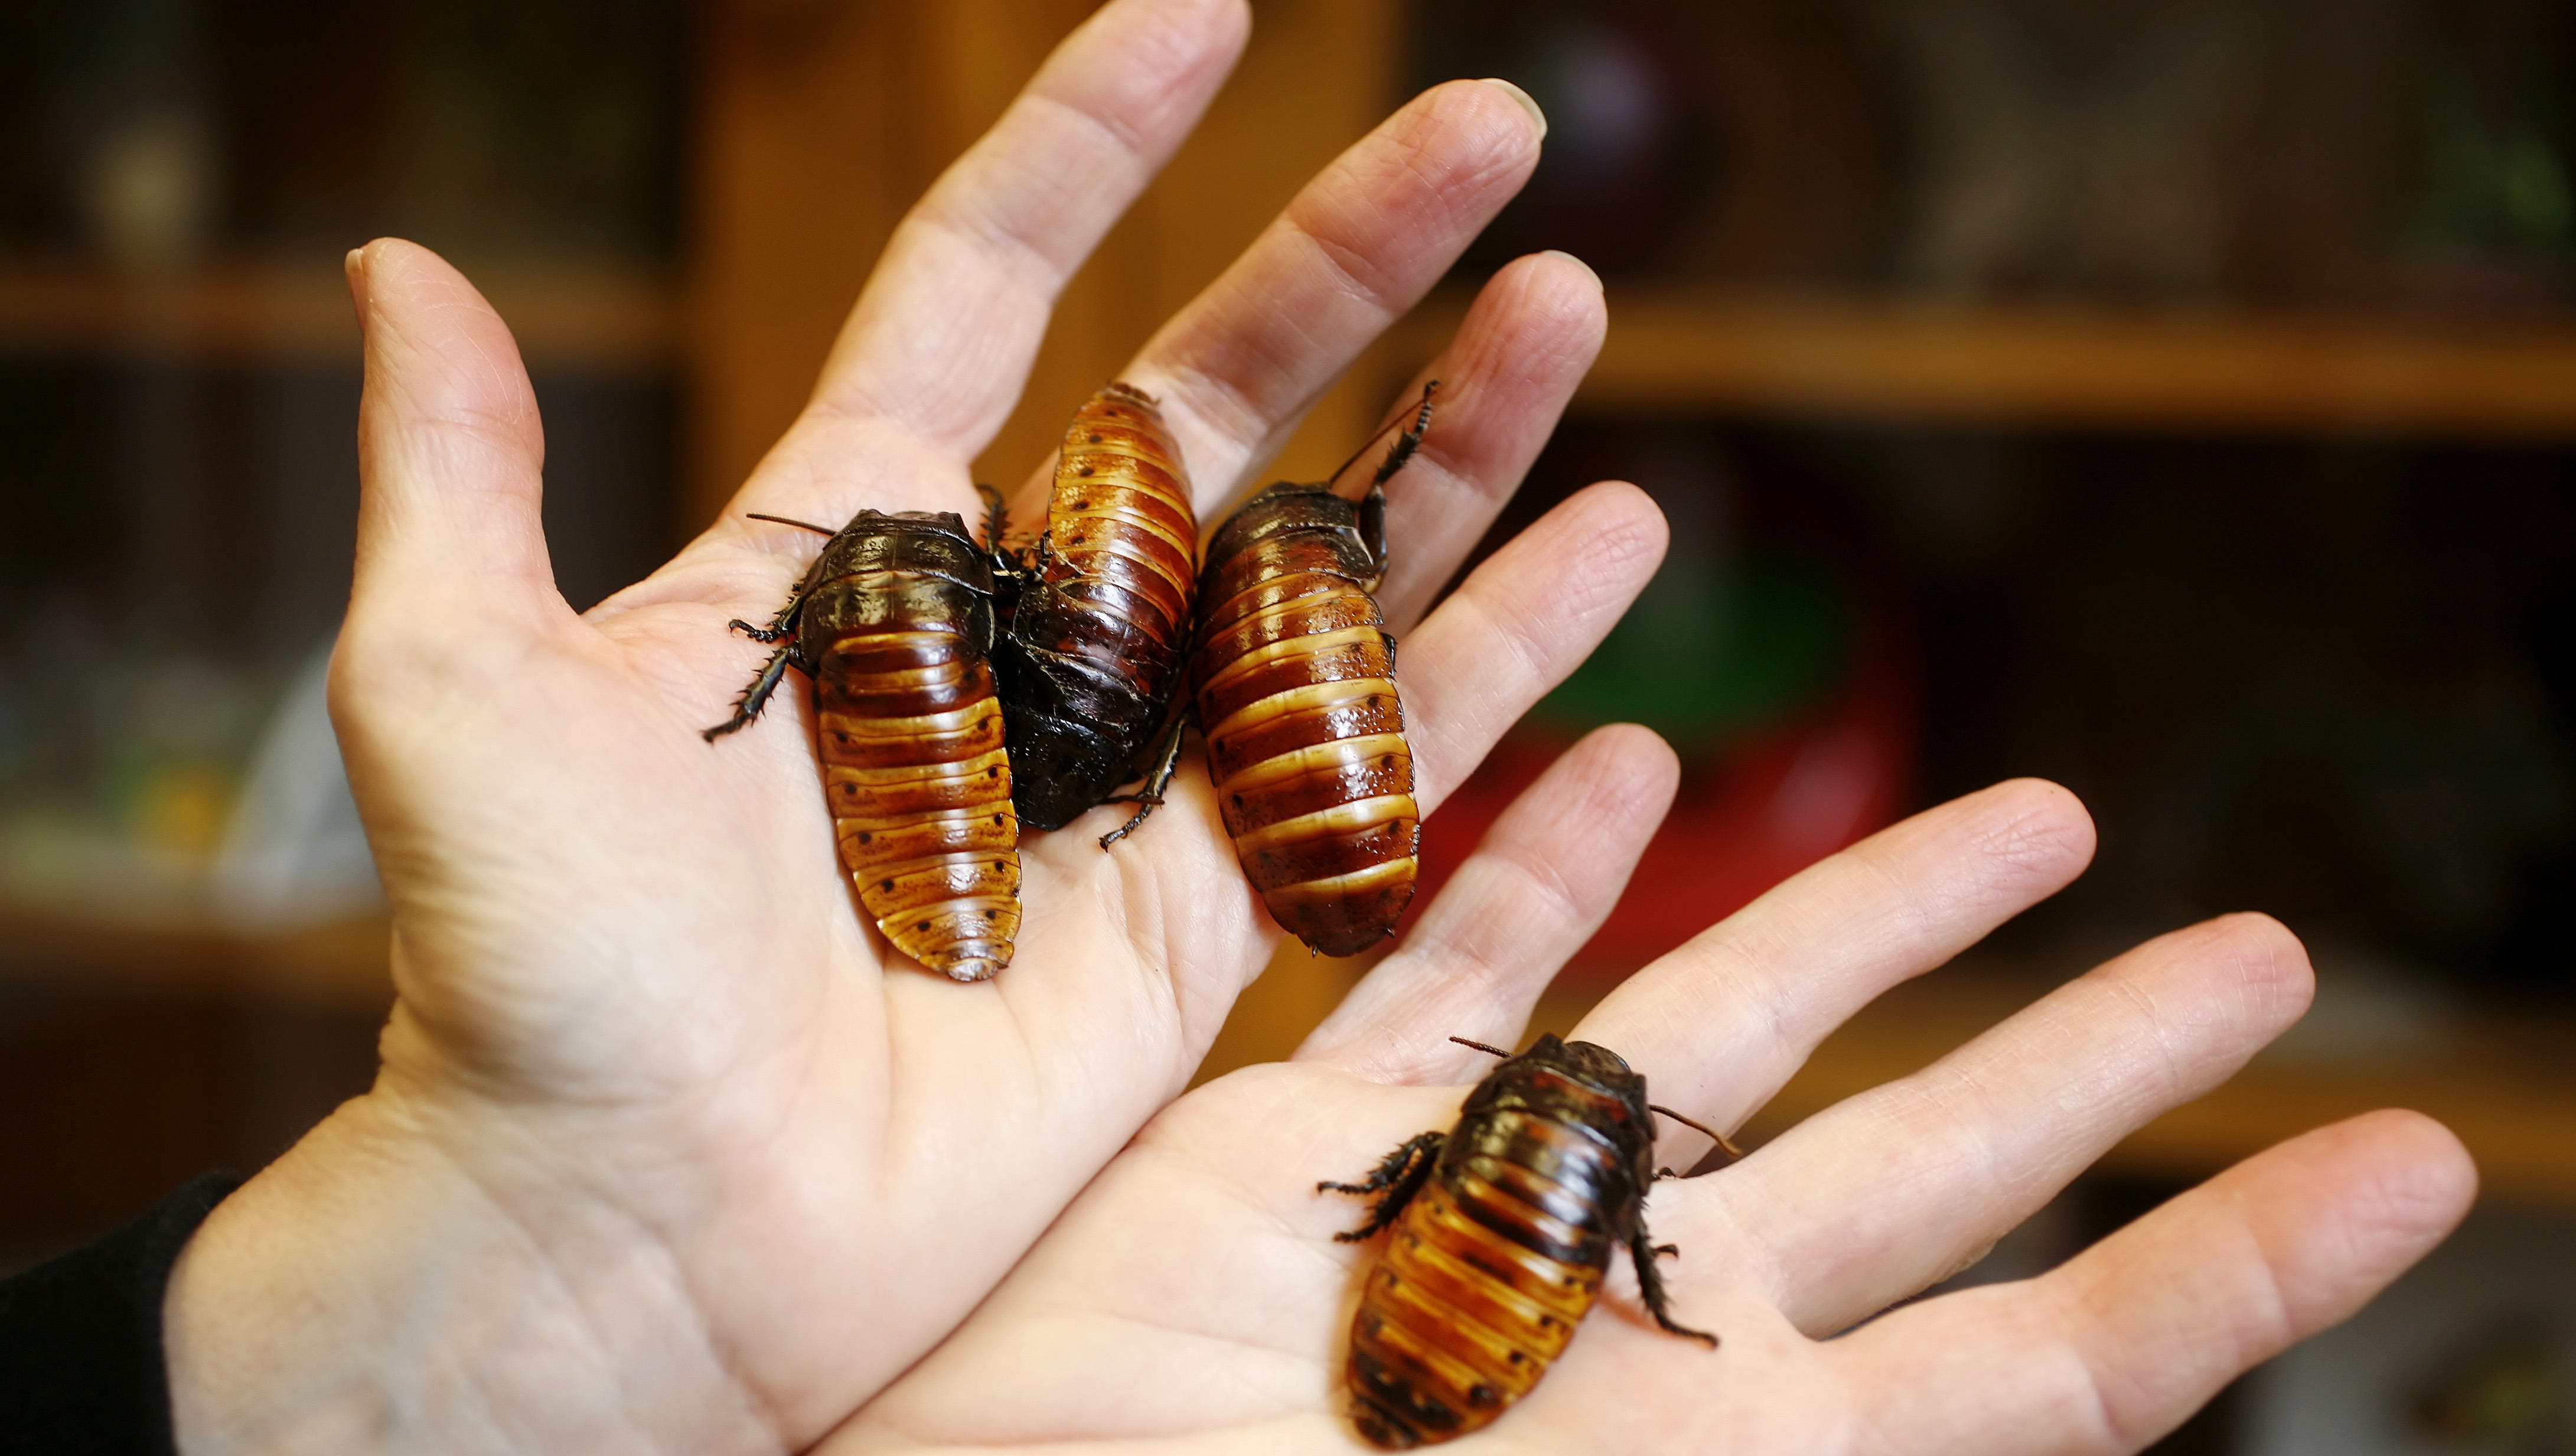 10 Ways To Keep Cockroaches Out Of Your Home